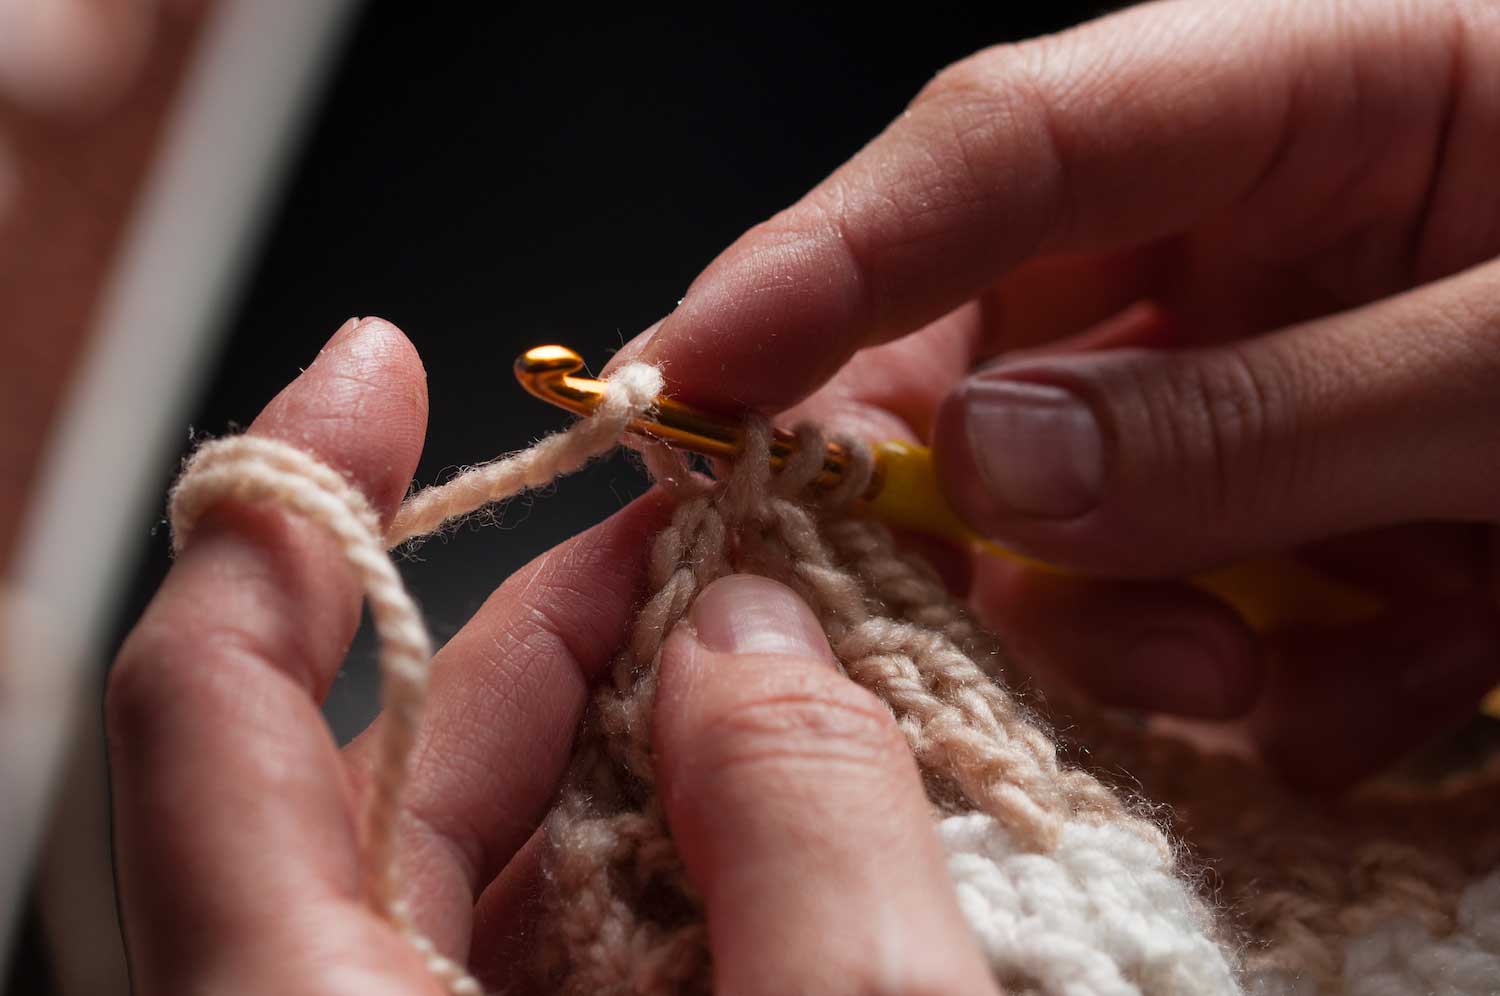 A closeup of a person's hands while crocheting.